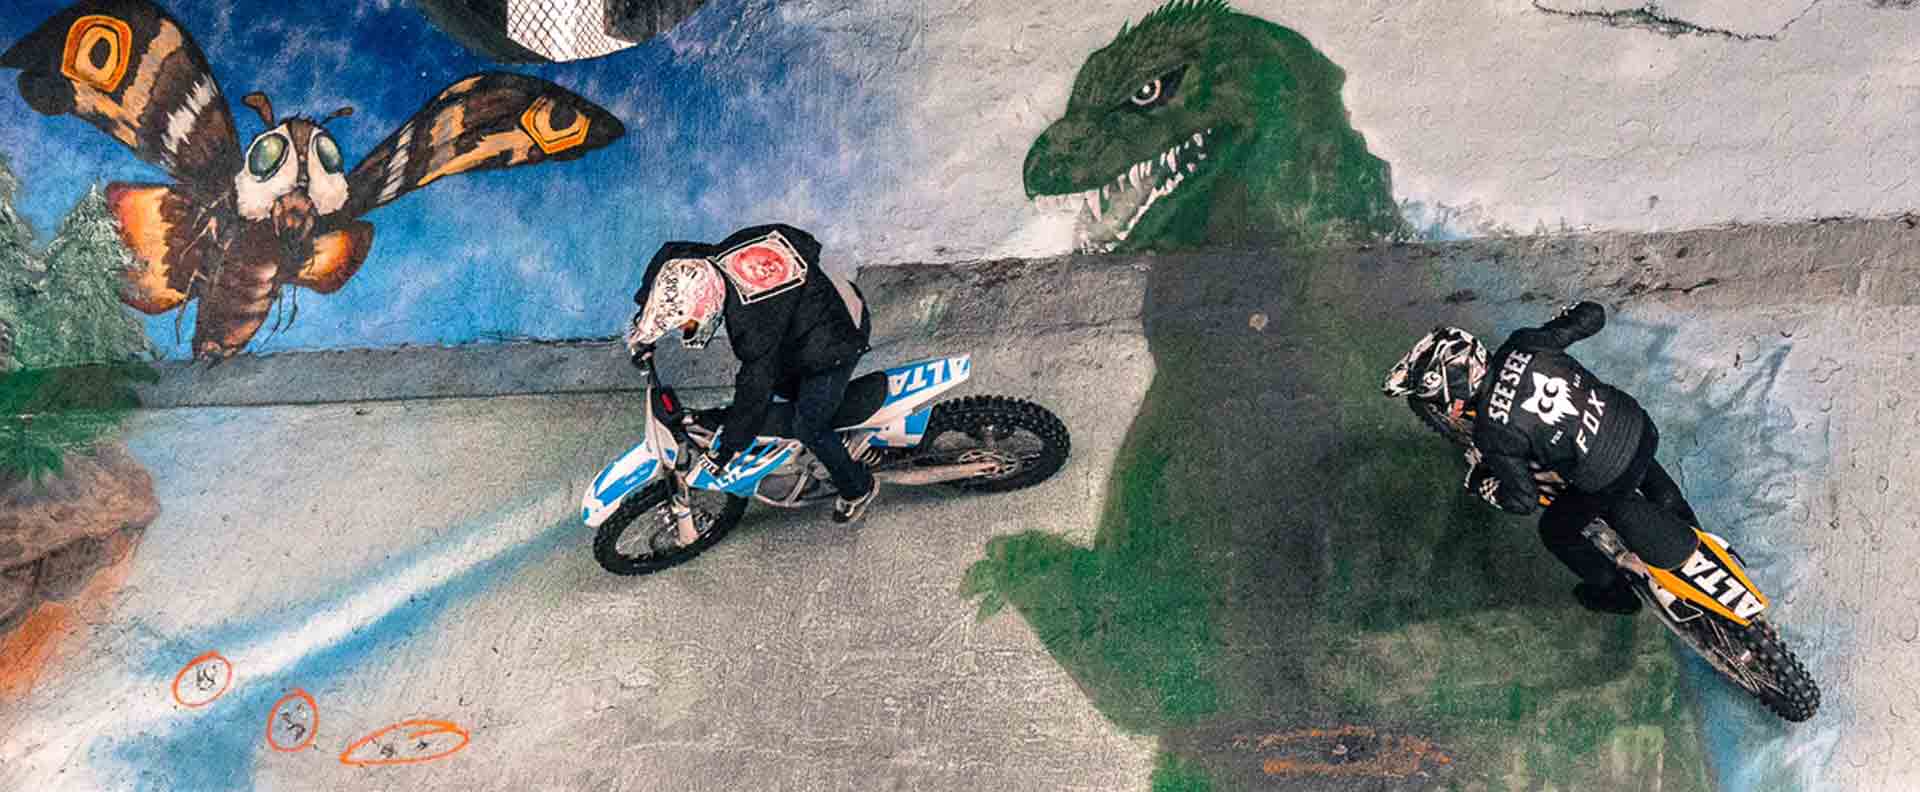 Andy with See See friend Jimmy Hill freestyle motocrosser riding steep slope with Godzilla at Burnside skate park in Portland, Oregon